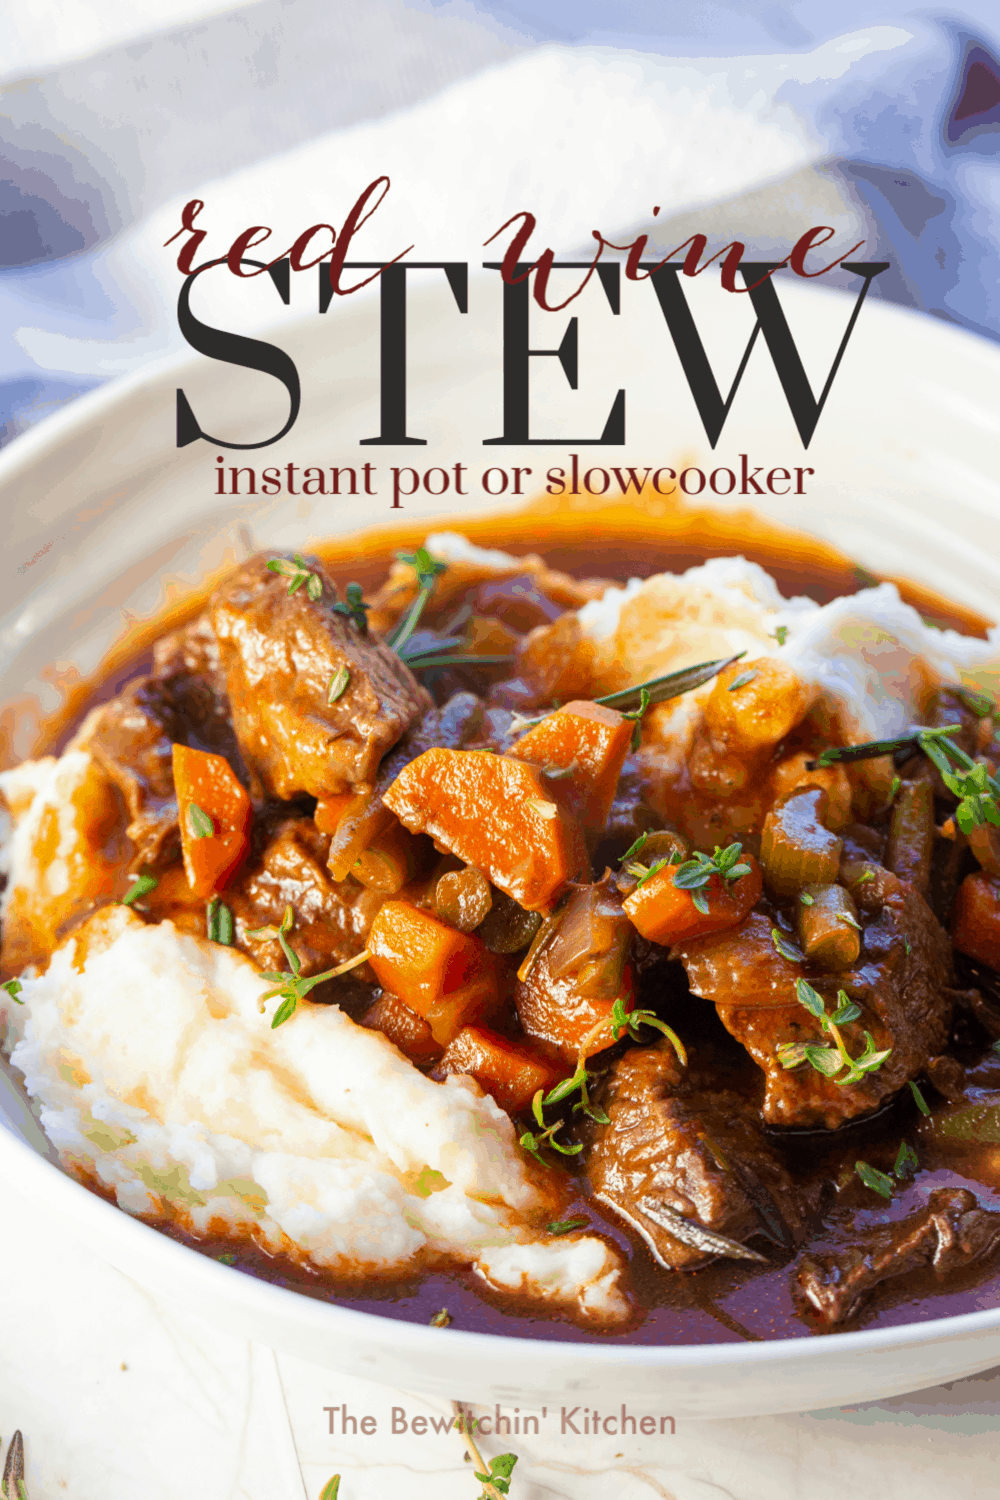 Slow Cooker Beef Stew with Cabernet Merlot